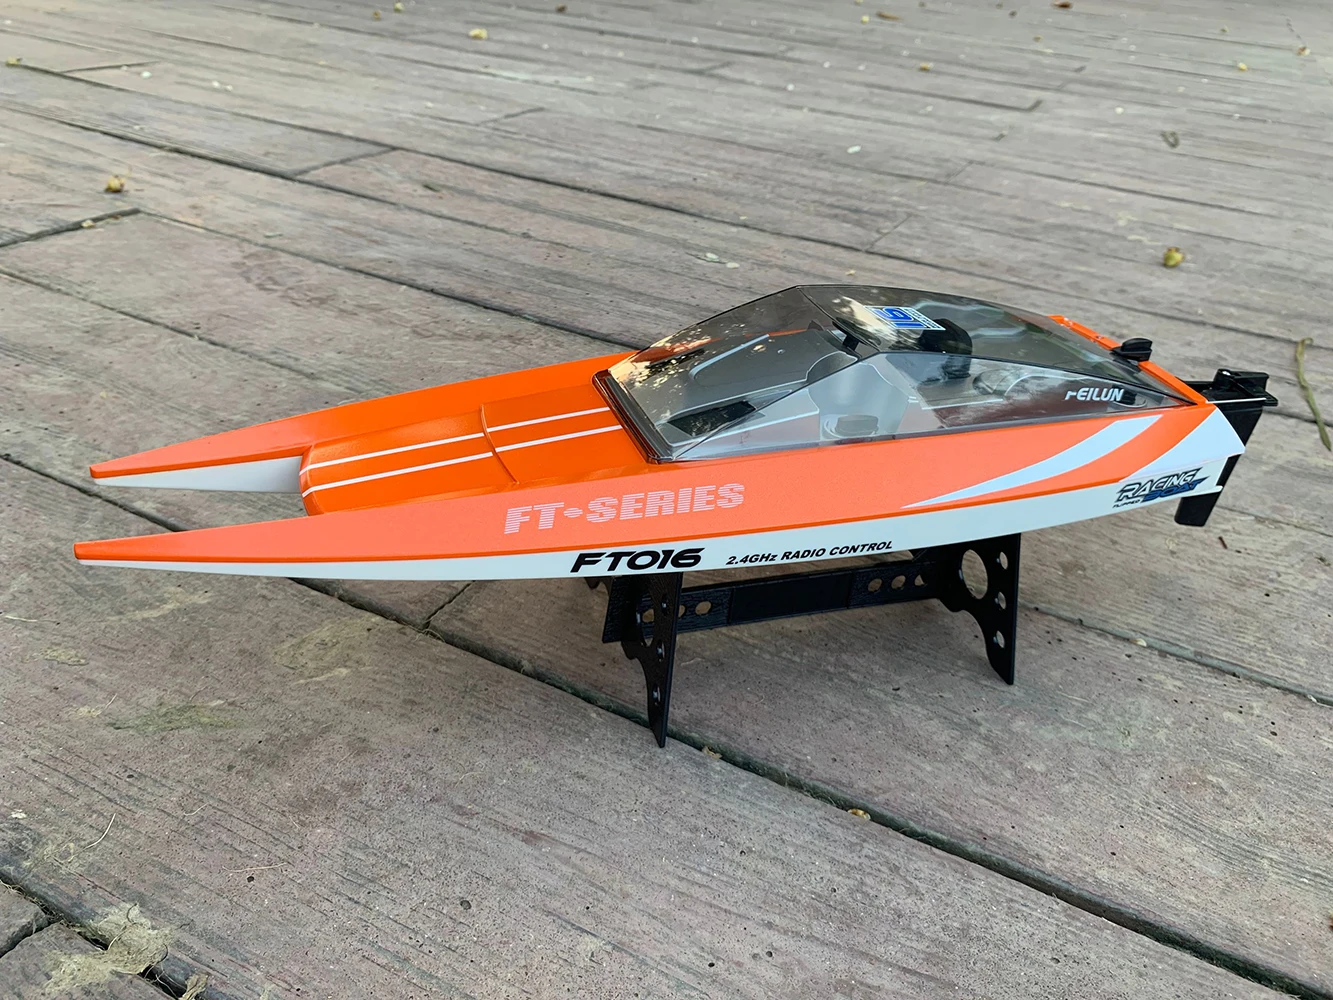 US STOCK Feilun FT016 Remote Control Boat Watercraft Large Racing High Speed 30-35KM/H Motor Excellent Auto Water Cool Functions